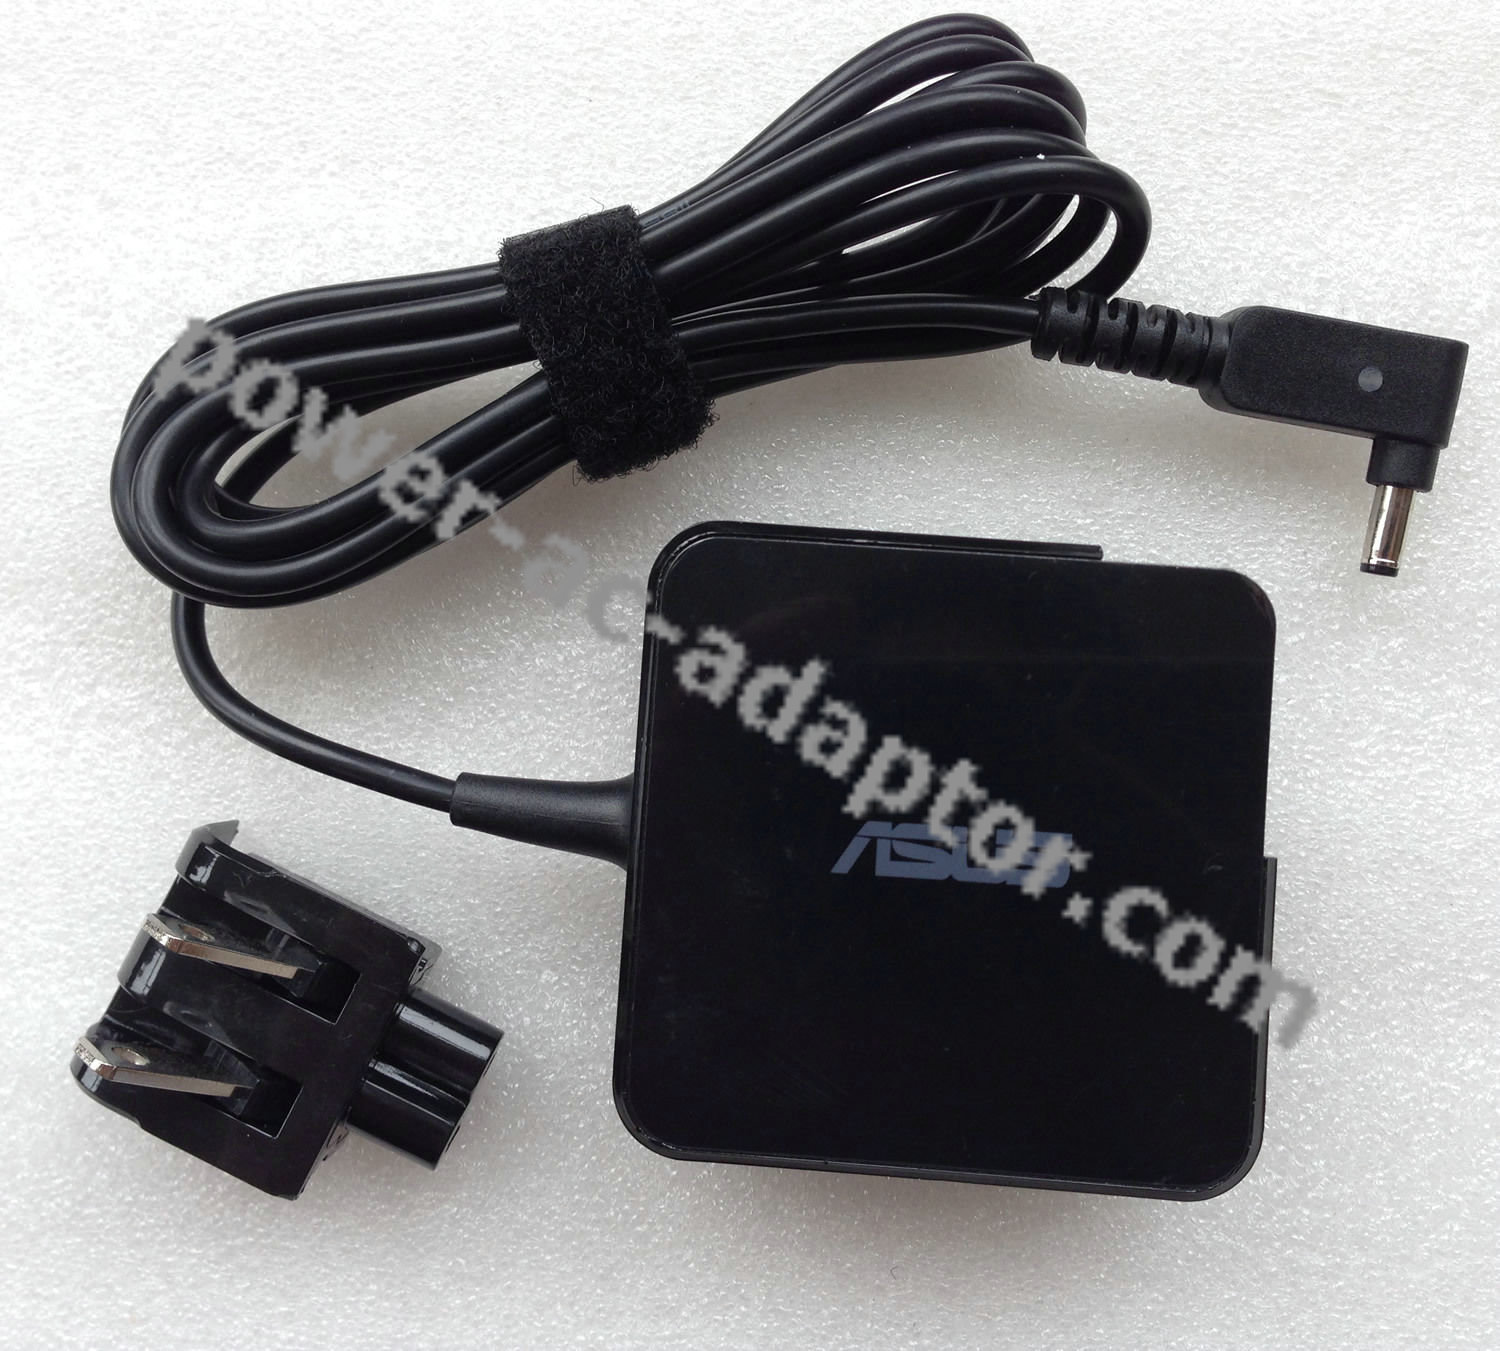 OEM ASUS 33W AC Power Adapter for ASUS X200CA-CT112H Notebook